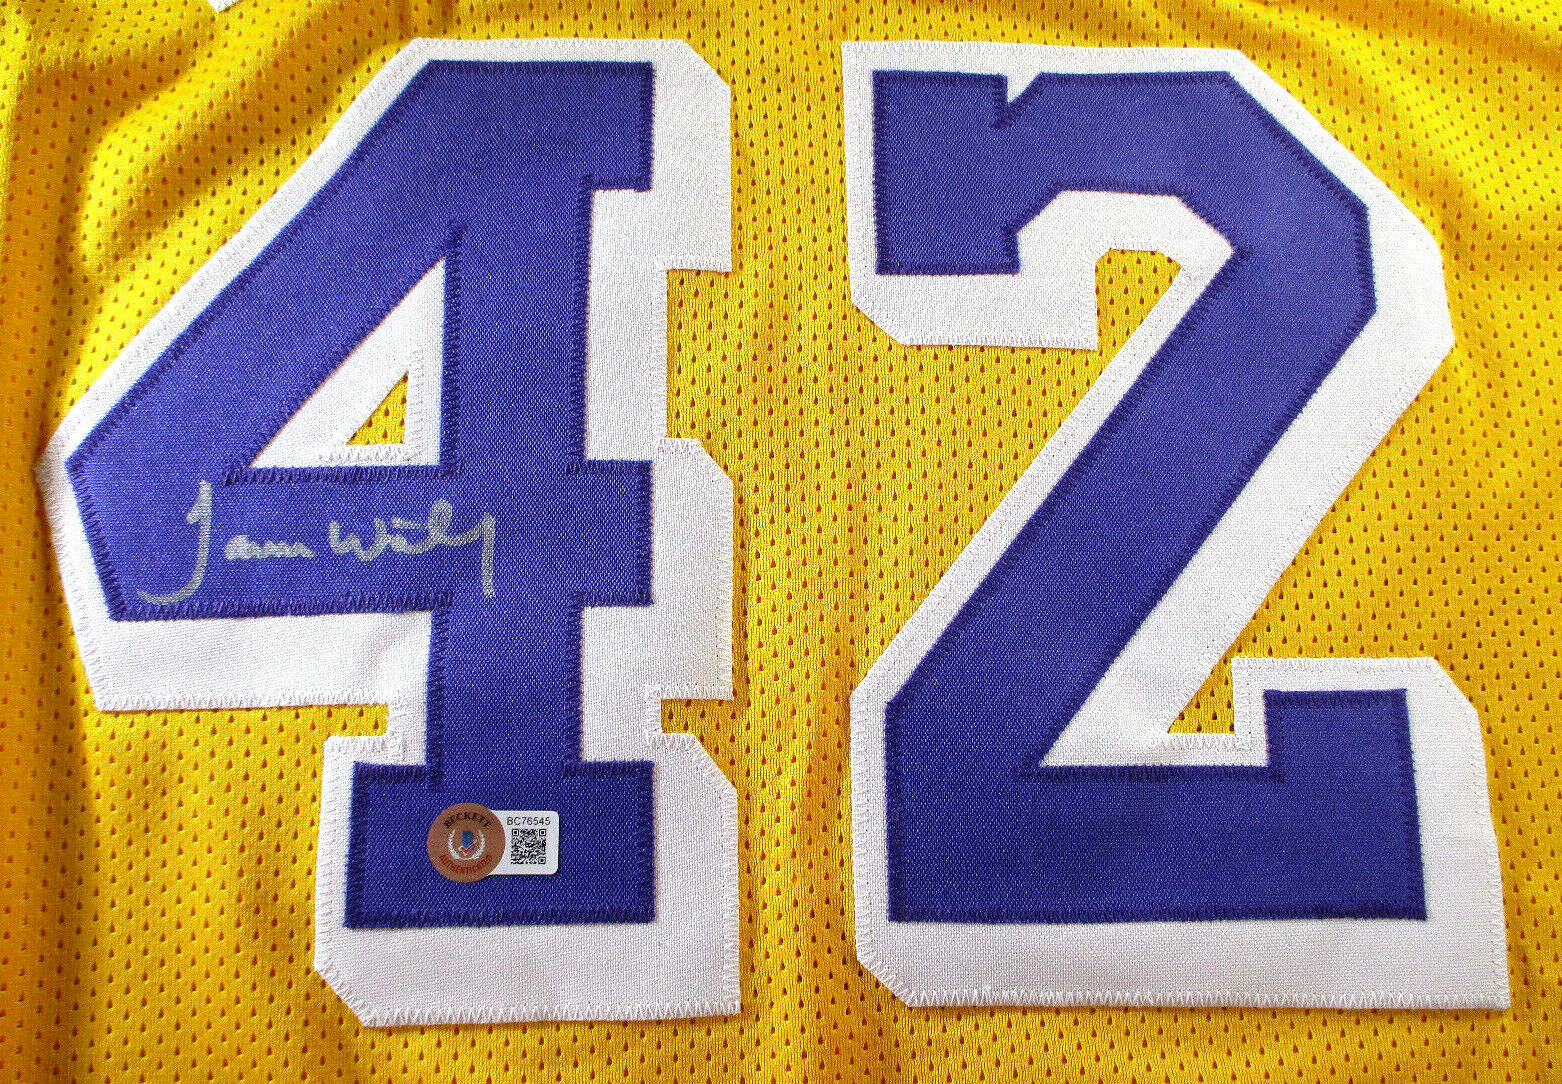 James Worthy / Autographed Los Angeles Lakers Yellow Custom Jersey / Beckett